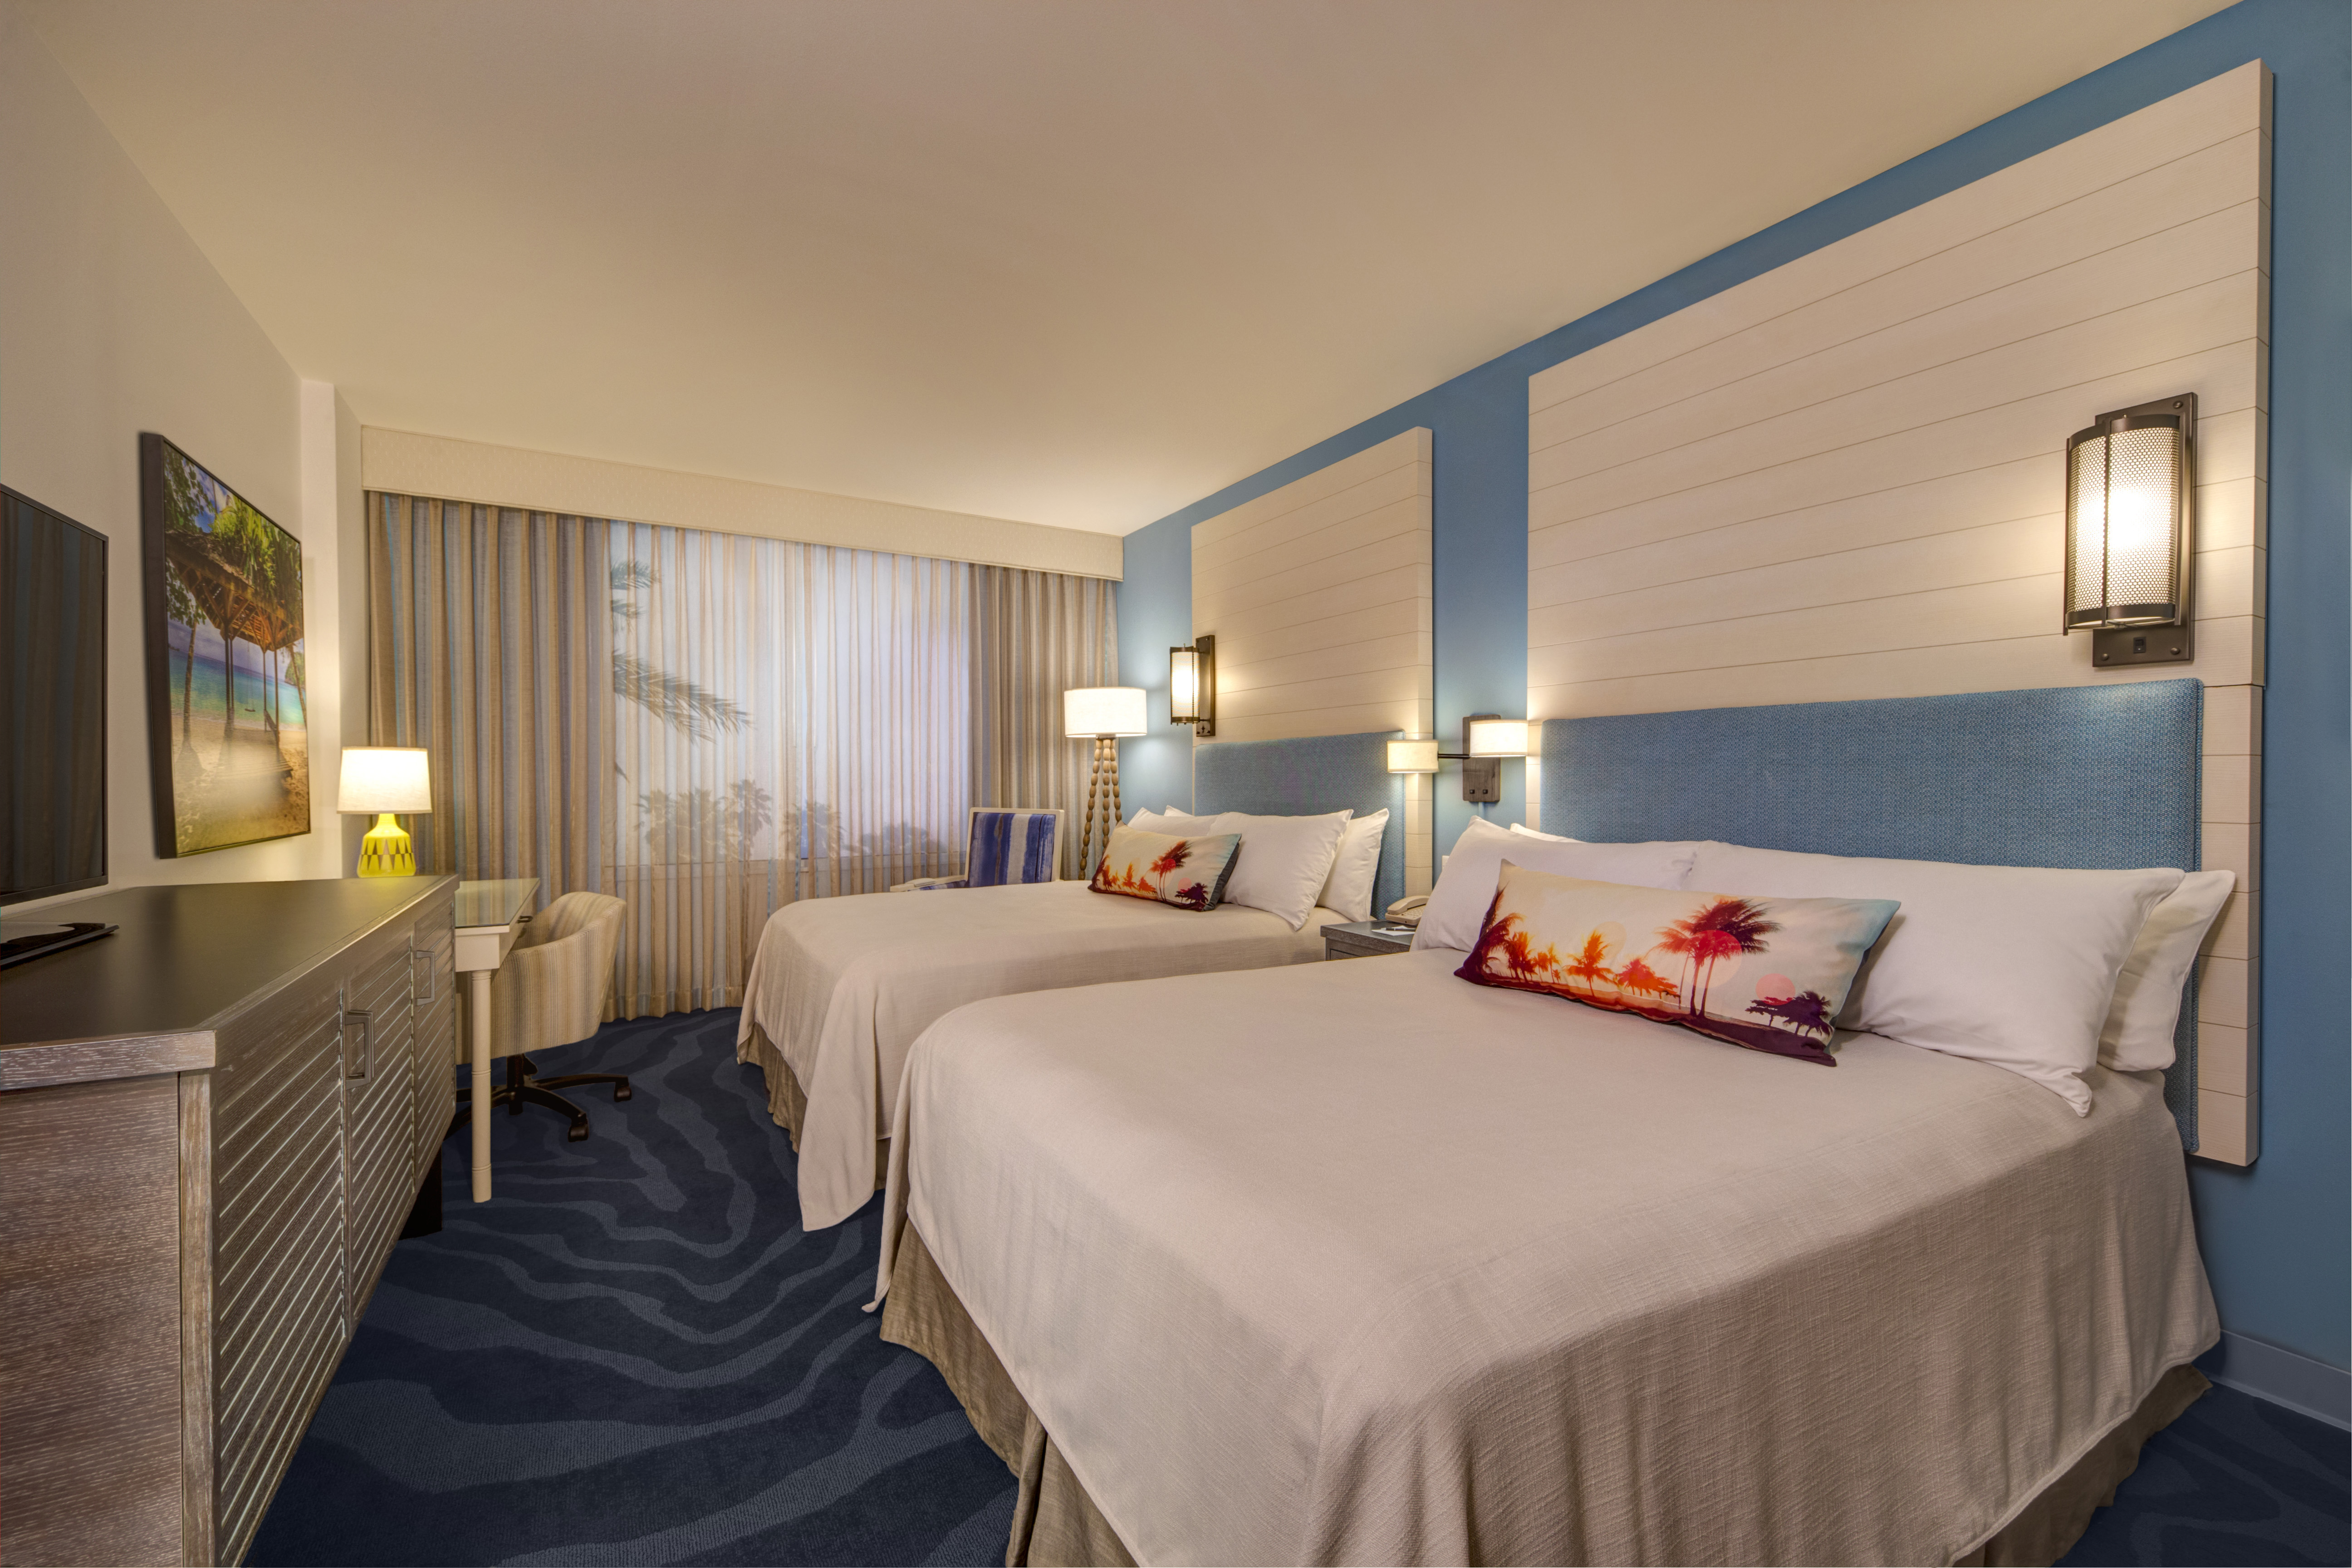 Universal Orlando News - Loews Sapphire Falls Resort Now Available for Booking